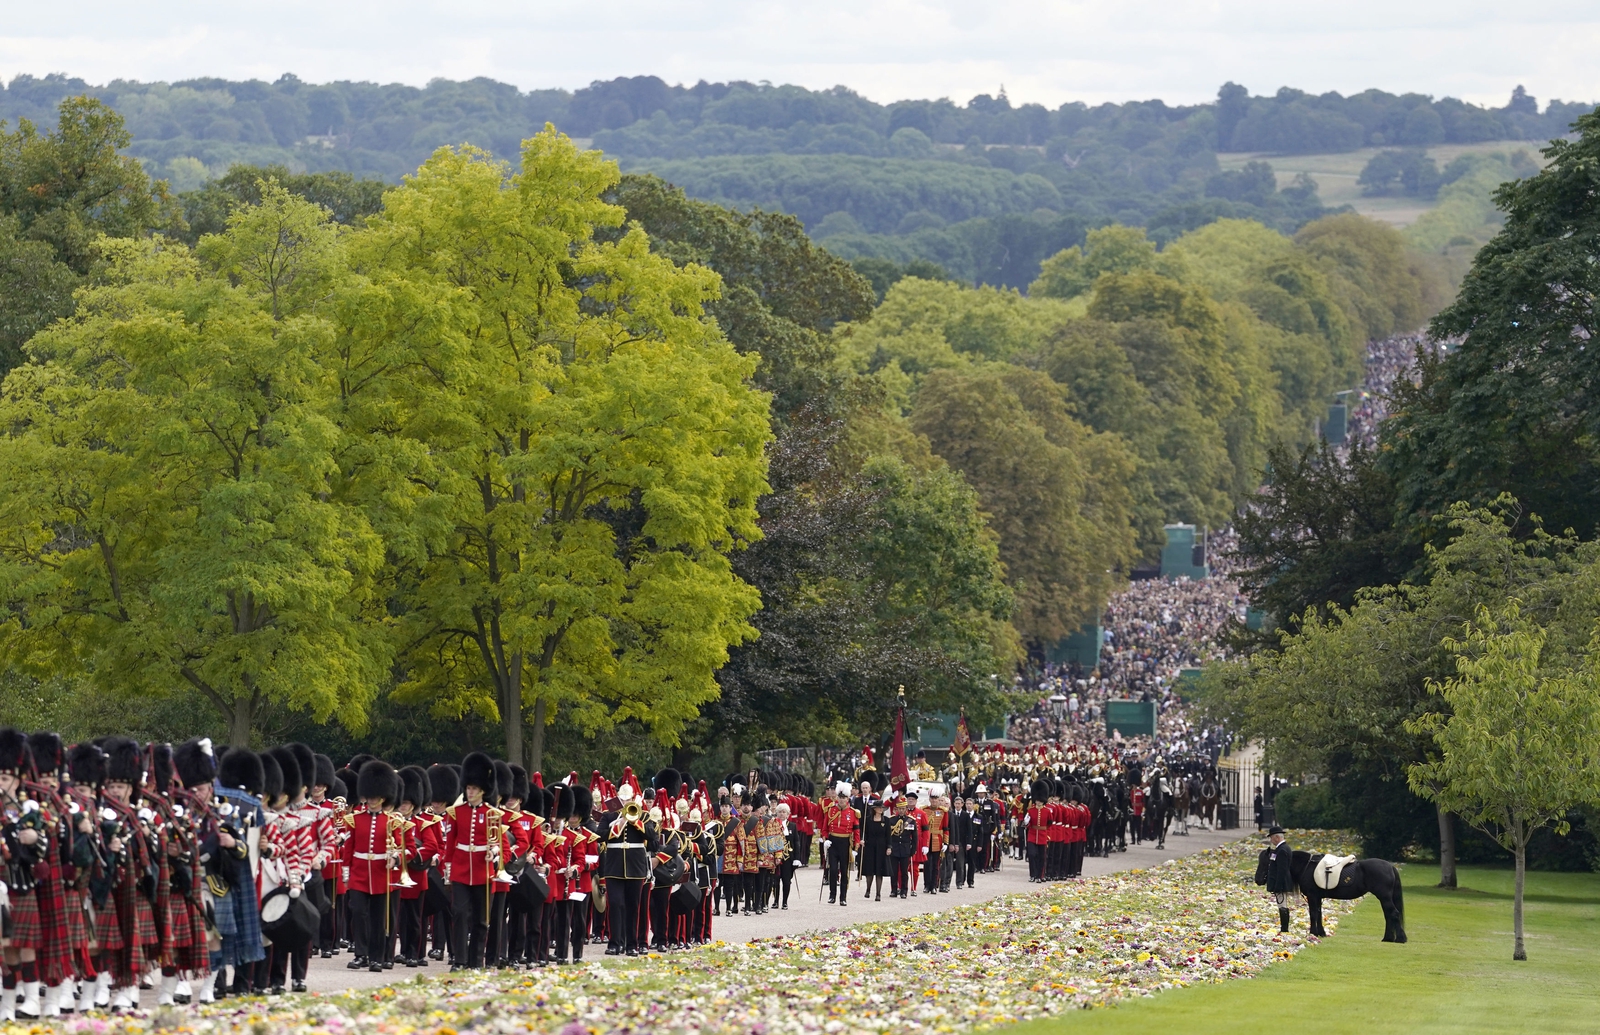 Image - Queen's funeral procession in Windsor (Andrew Matthews/WPA Pool/Getty)